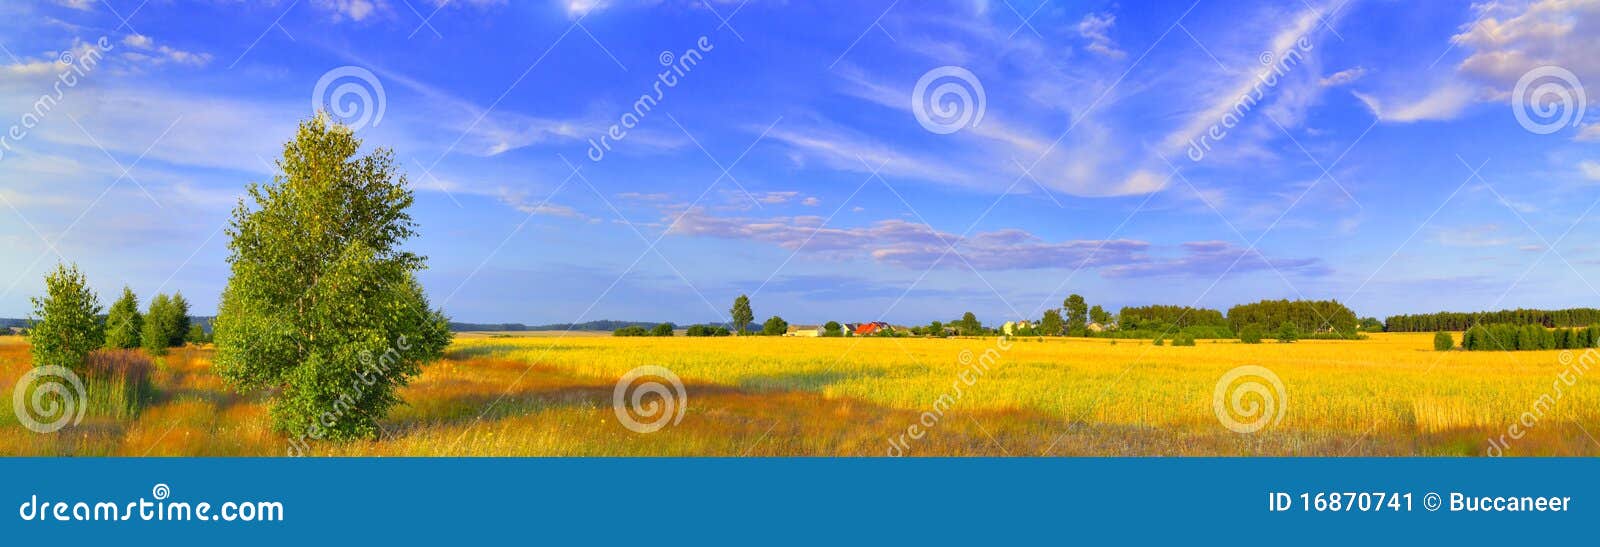 panoramic rural landscape with birch